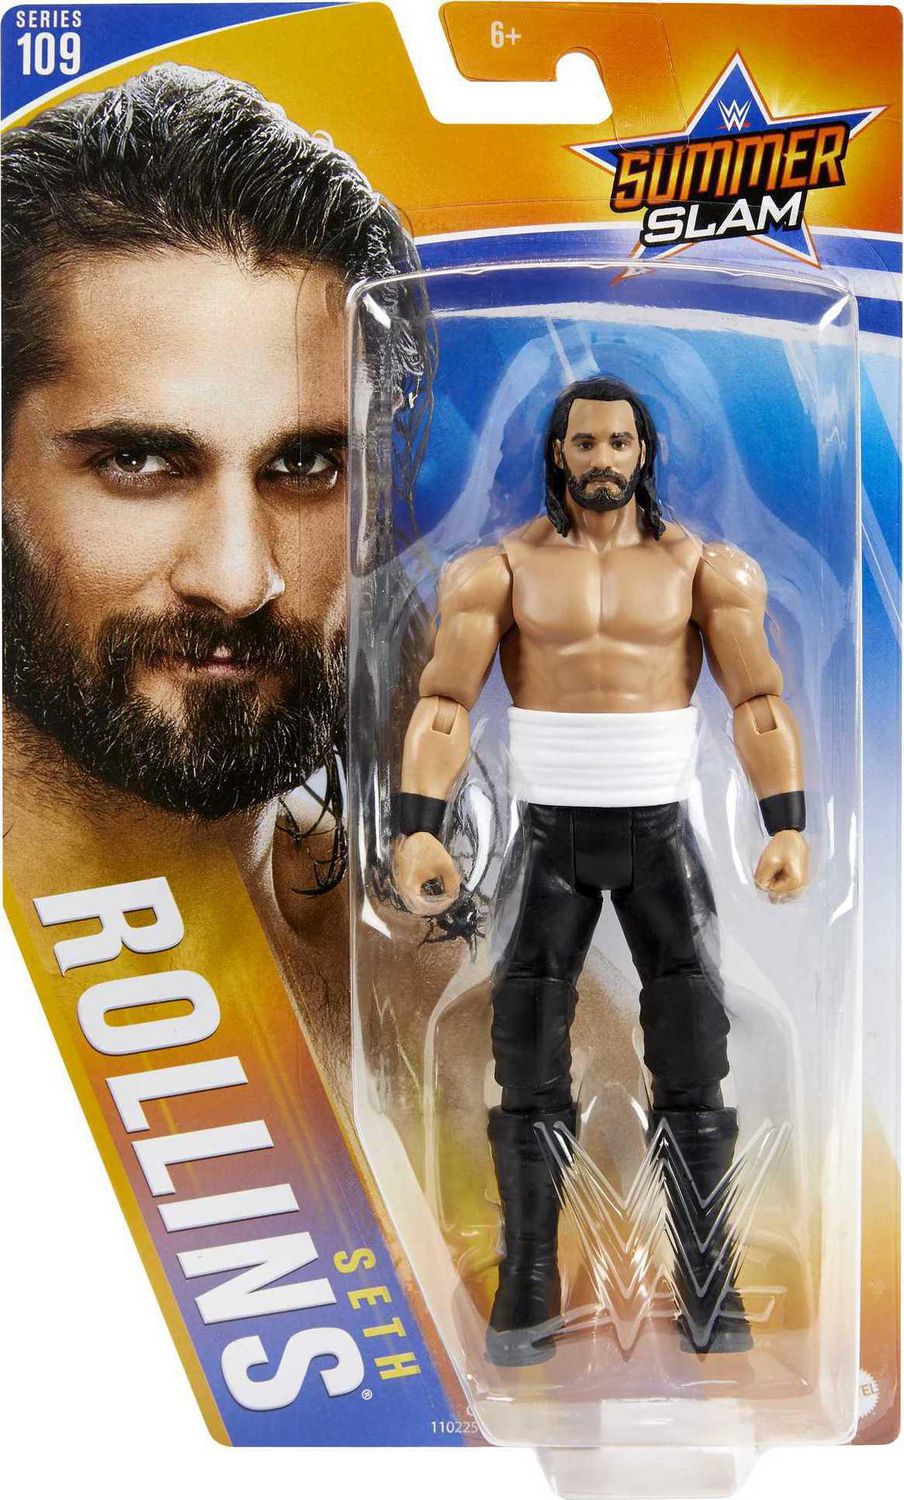 WWE GGP07 Wrekkin’ 6-inch Seth Rollins Action Figure with Wreckable Accessory Multicoloured